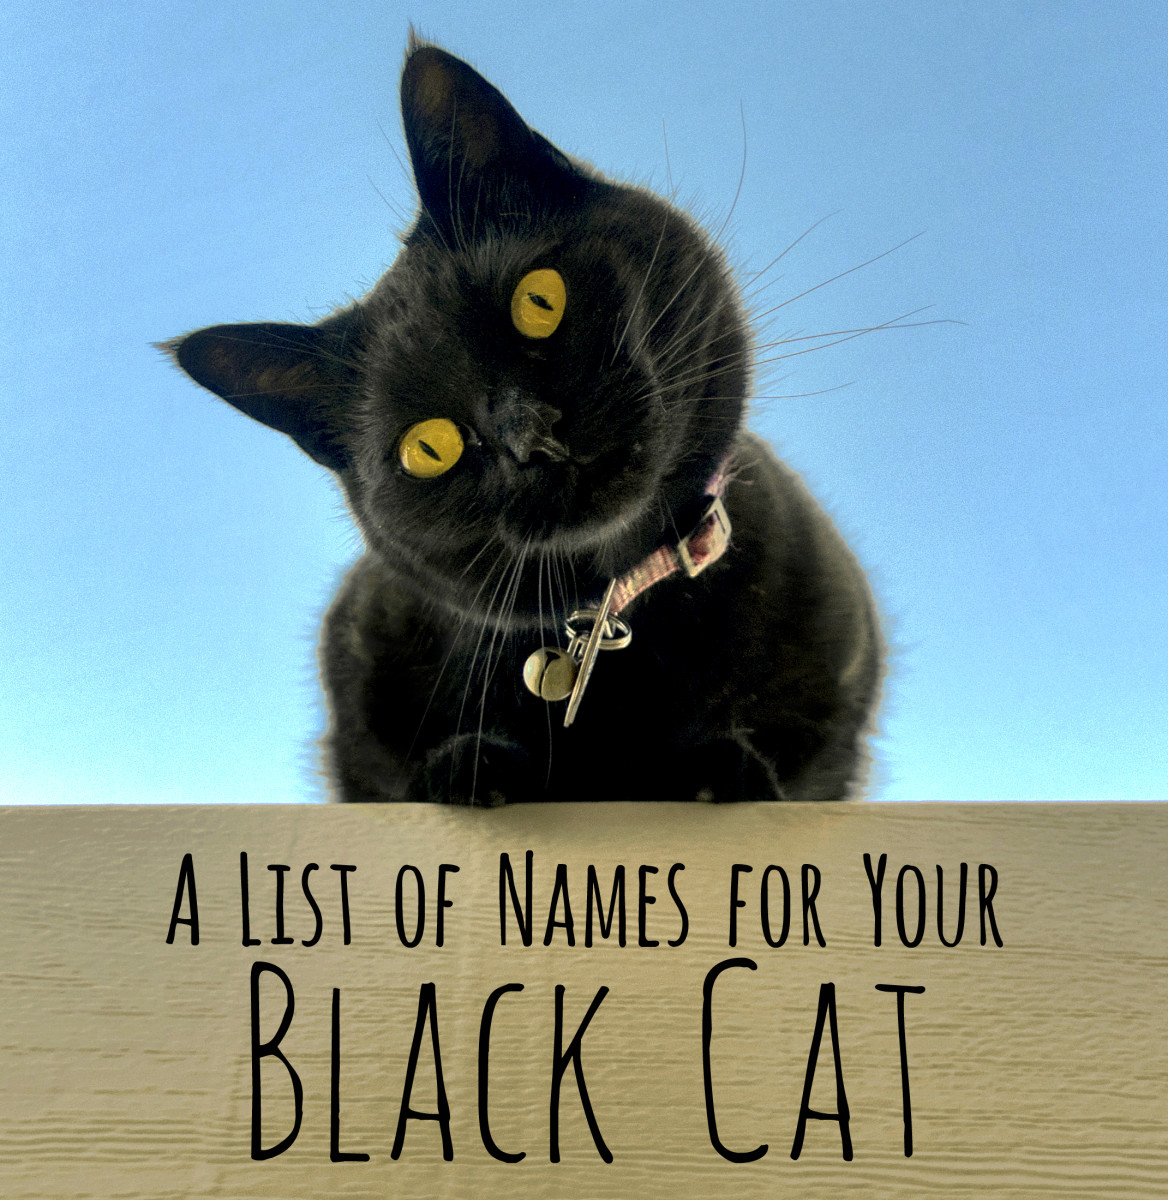 Cool, Unique, and Creative Names for Your Black Cat